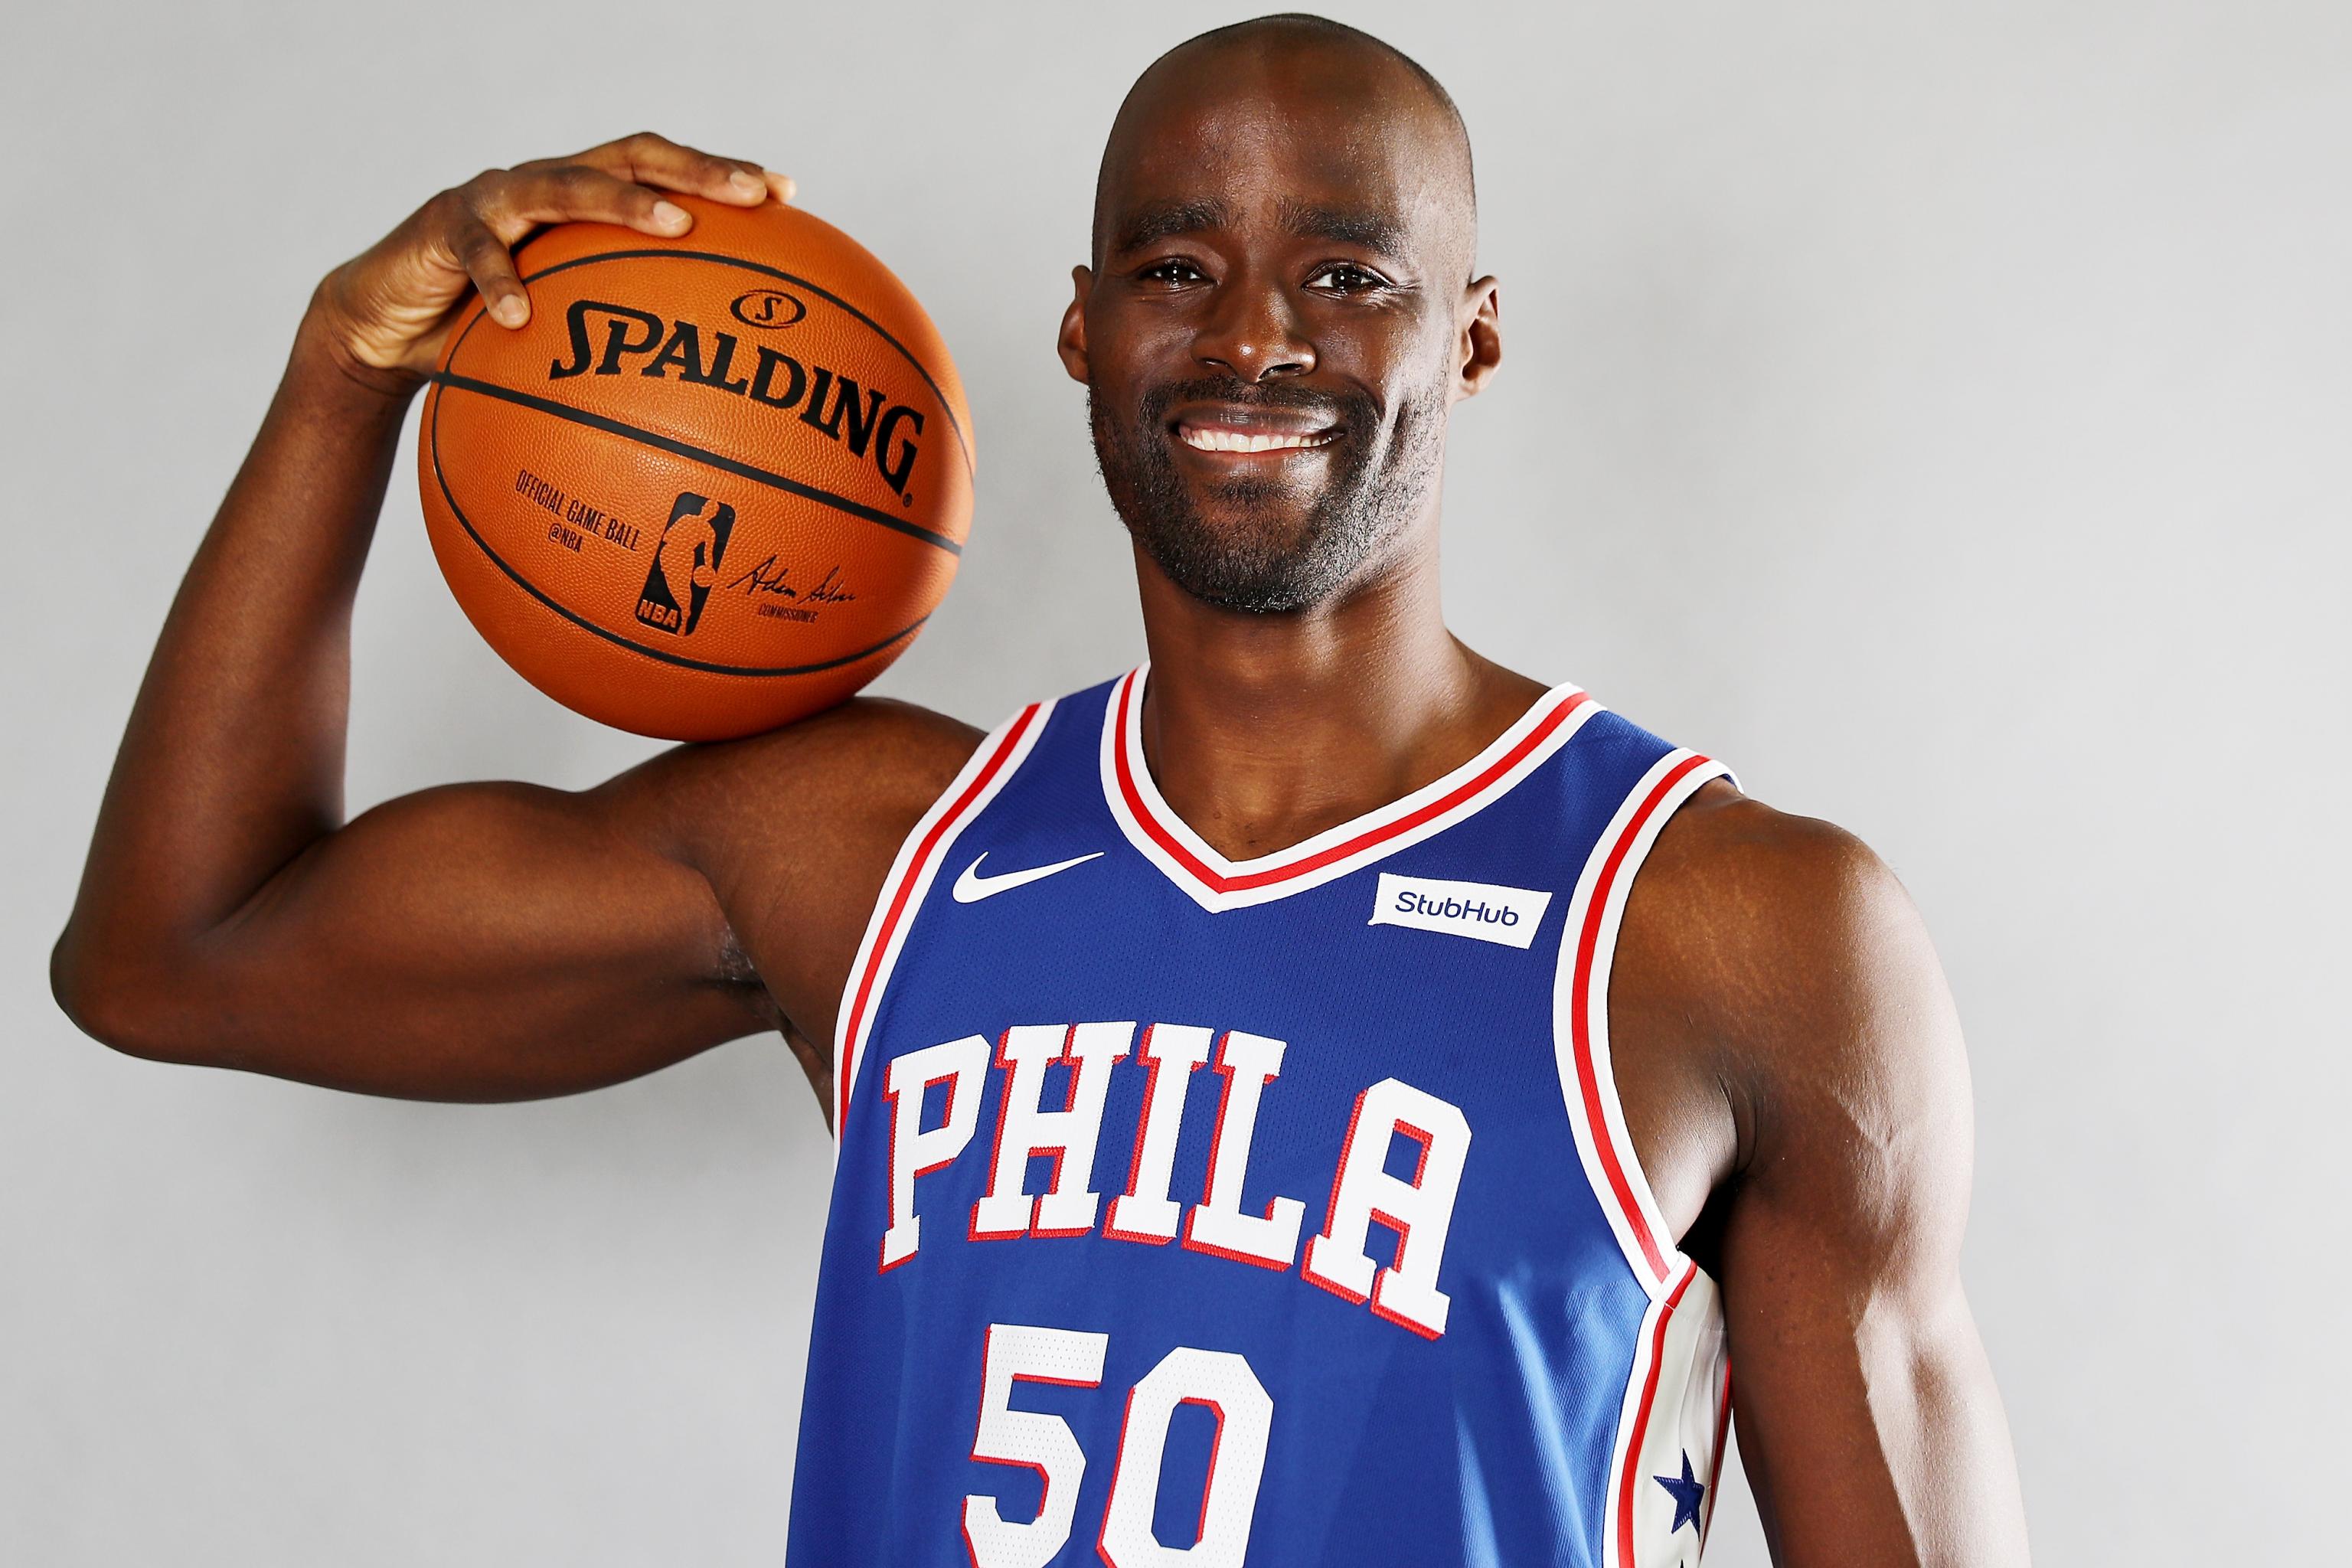 After four-plus years away, Emeka Okafor back in NBA and part of another  lengthy New Orleans winning streak